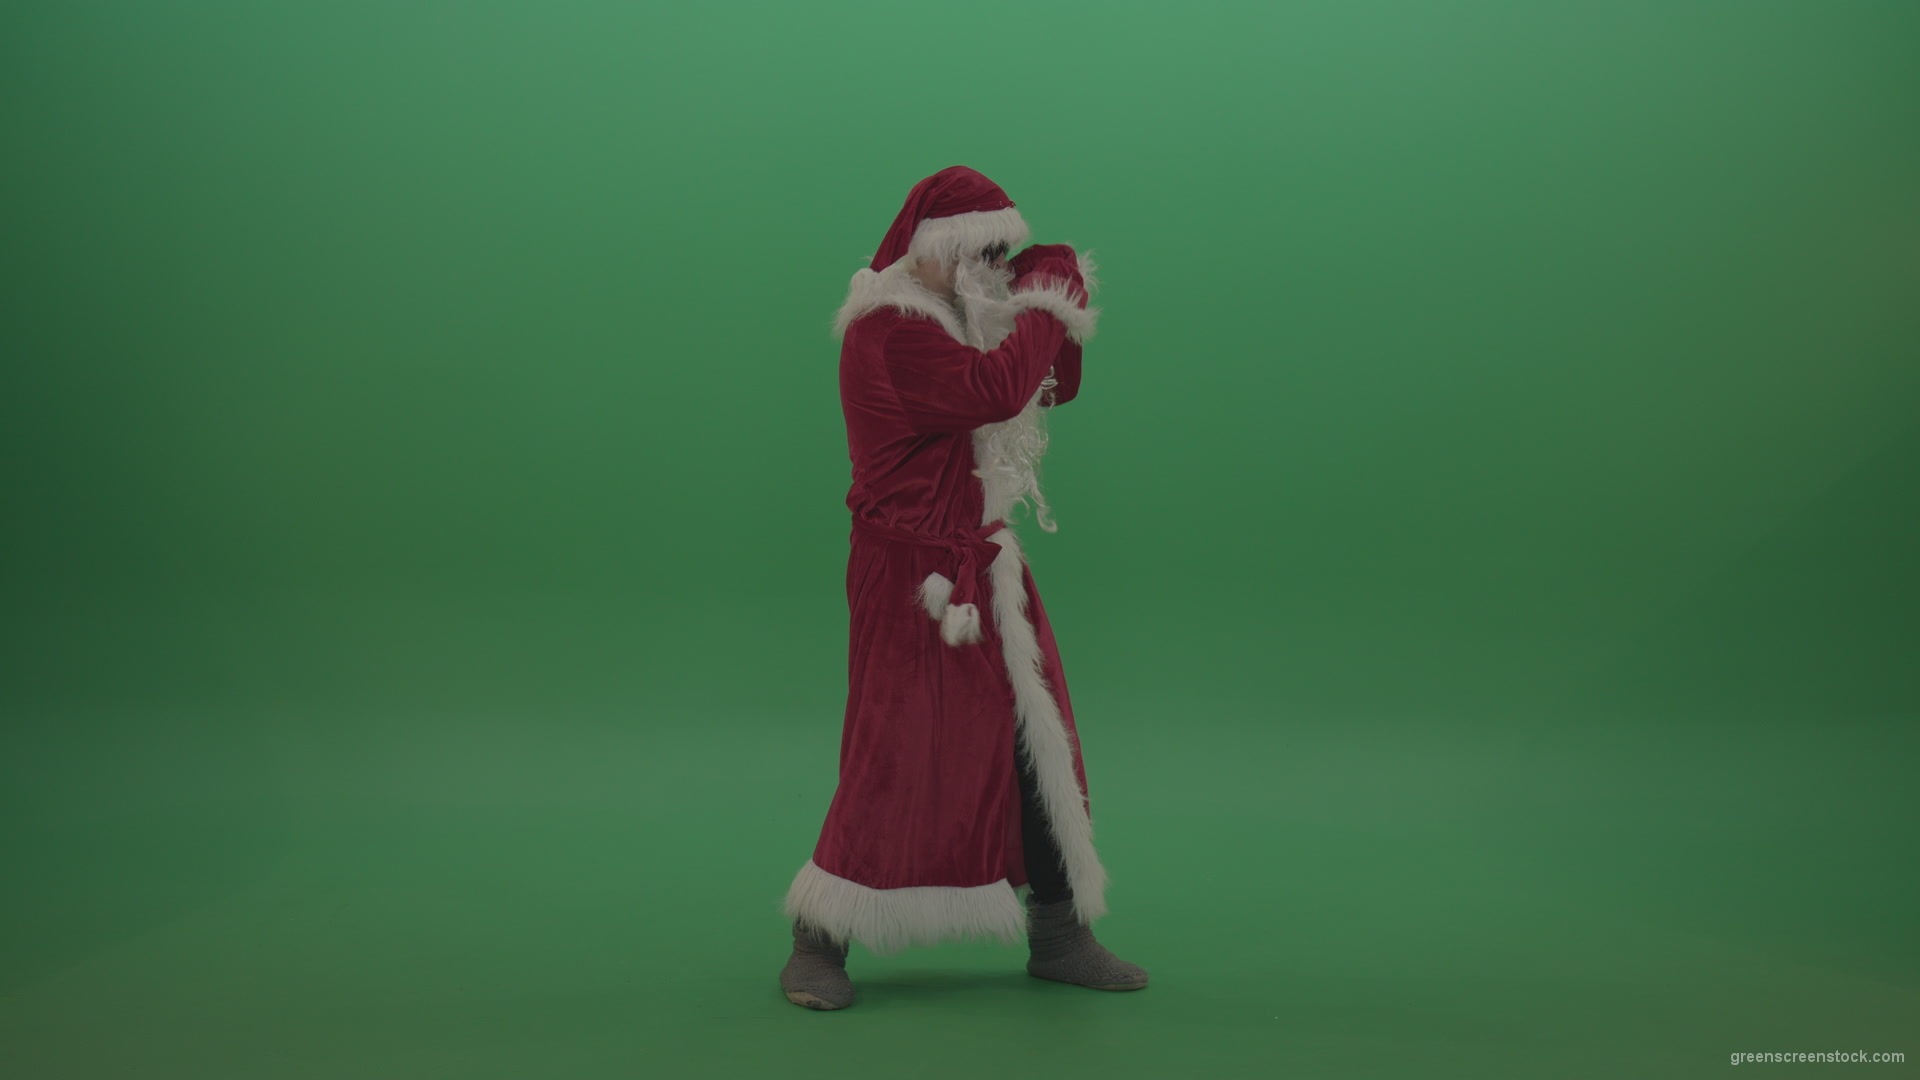 Santa-in-black-glasses-show-cases-his-boxing-skills-over-chromakey-background_002 Green Screen Stock